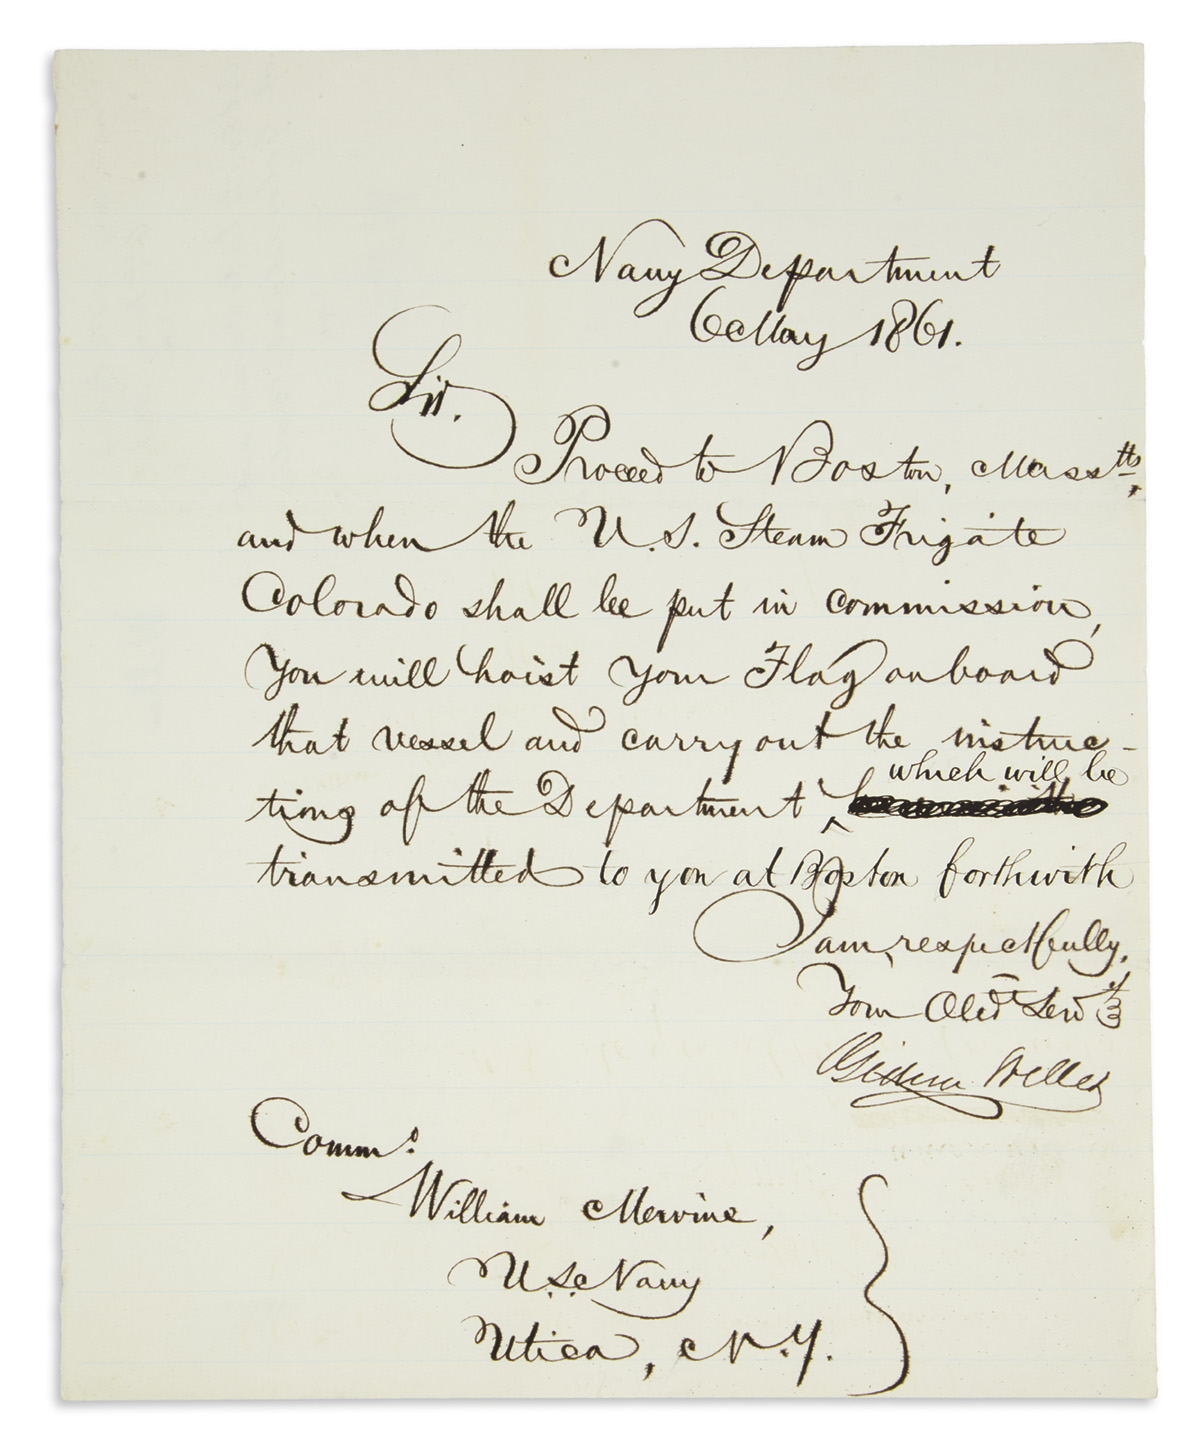 (CIVIL WAR.) WELLES, GIDEON. Letter Signed, as Secretary of the Navy, to Commodore William Mervine,